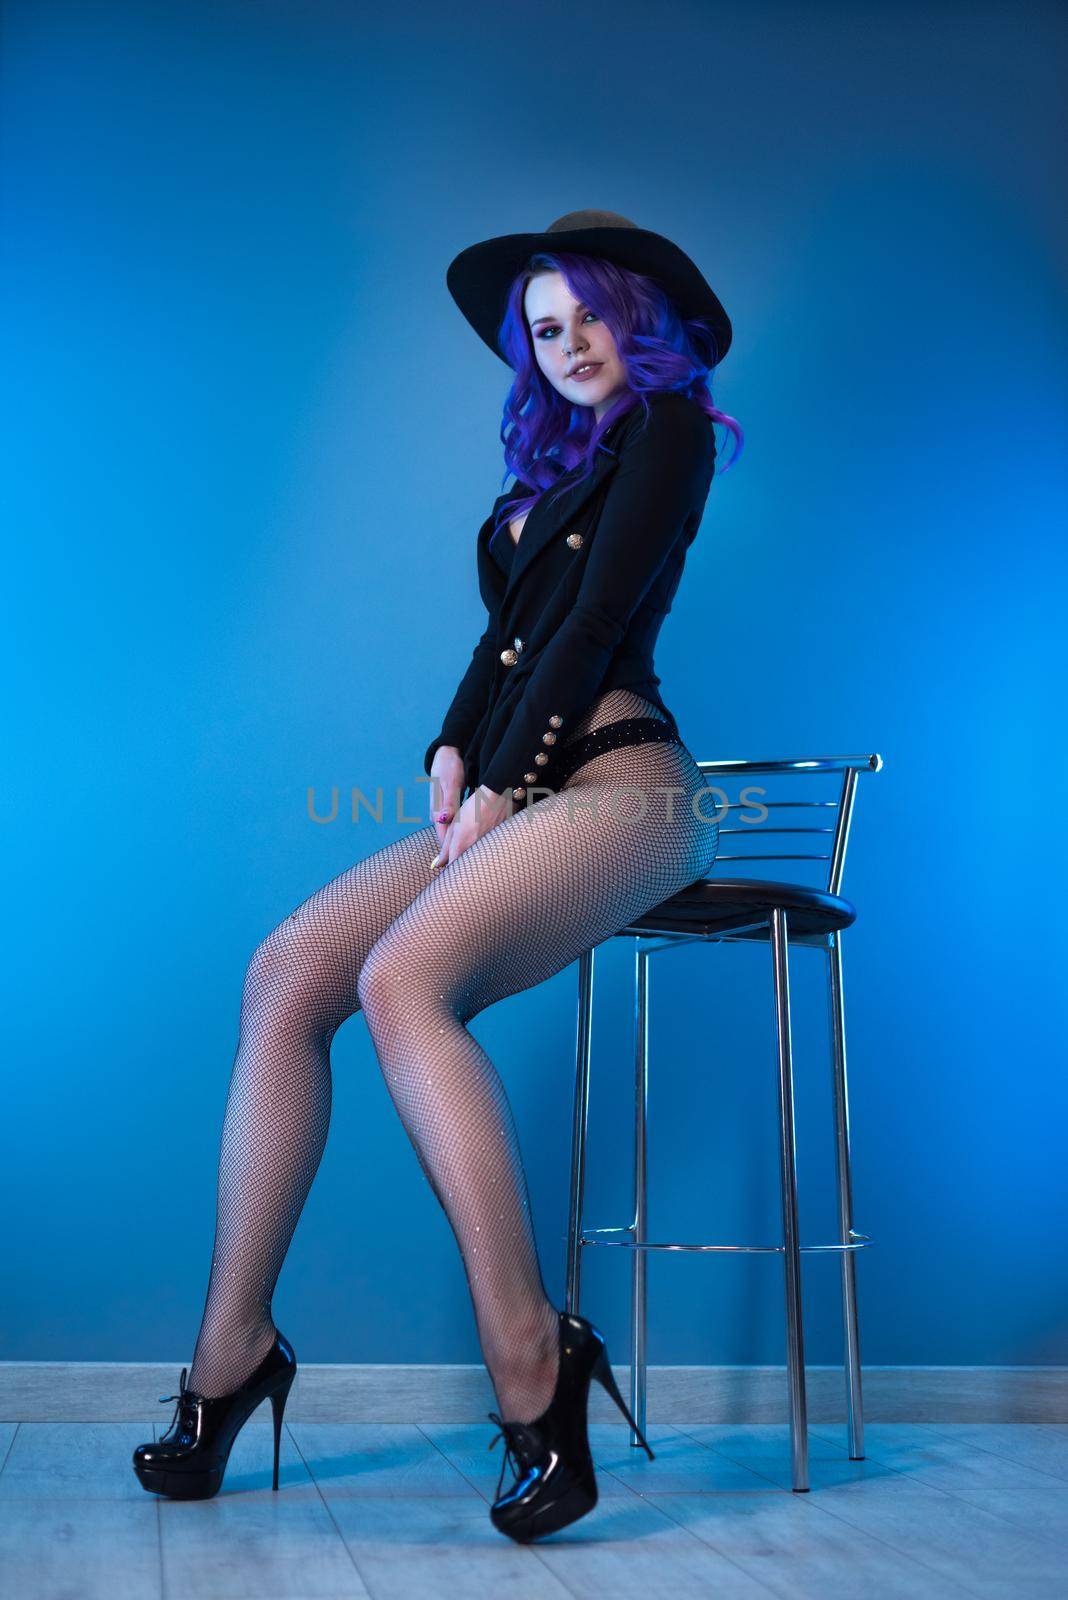 the sexy girl in a fashionable jacket and hat poses erotically in her underwear